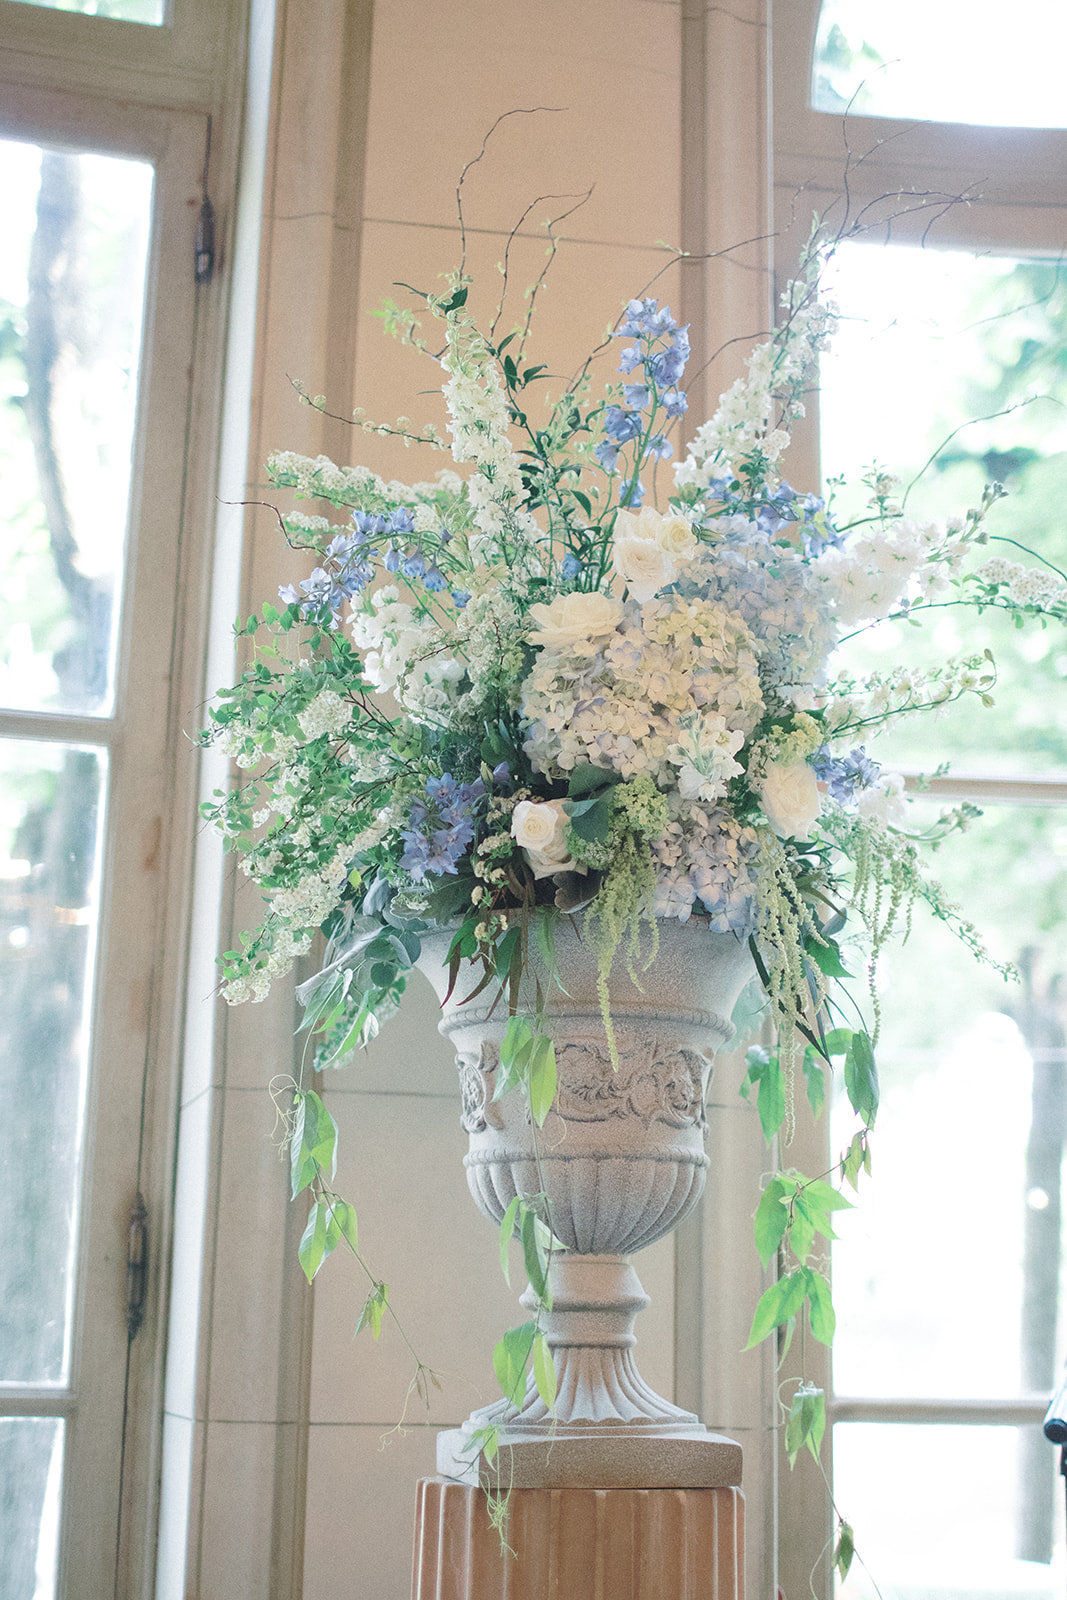 Ceremony floral arrangement with blue and white flowers and overflowing greenery